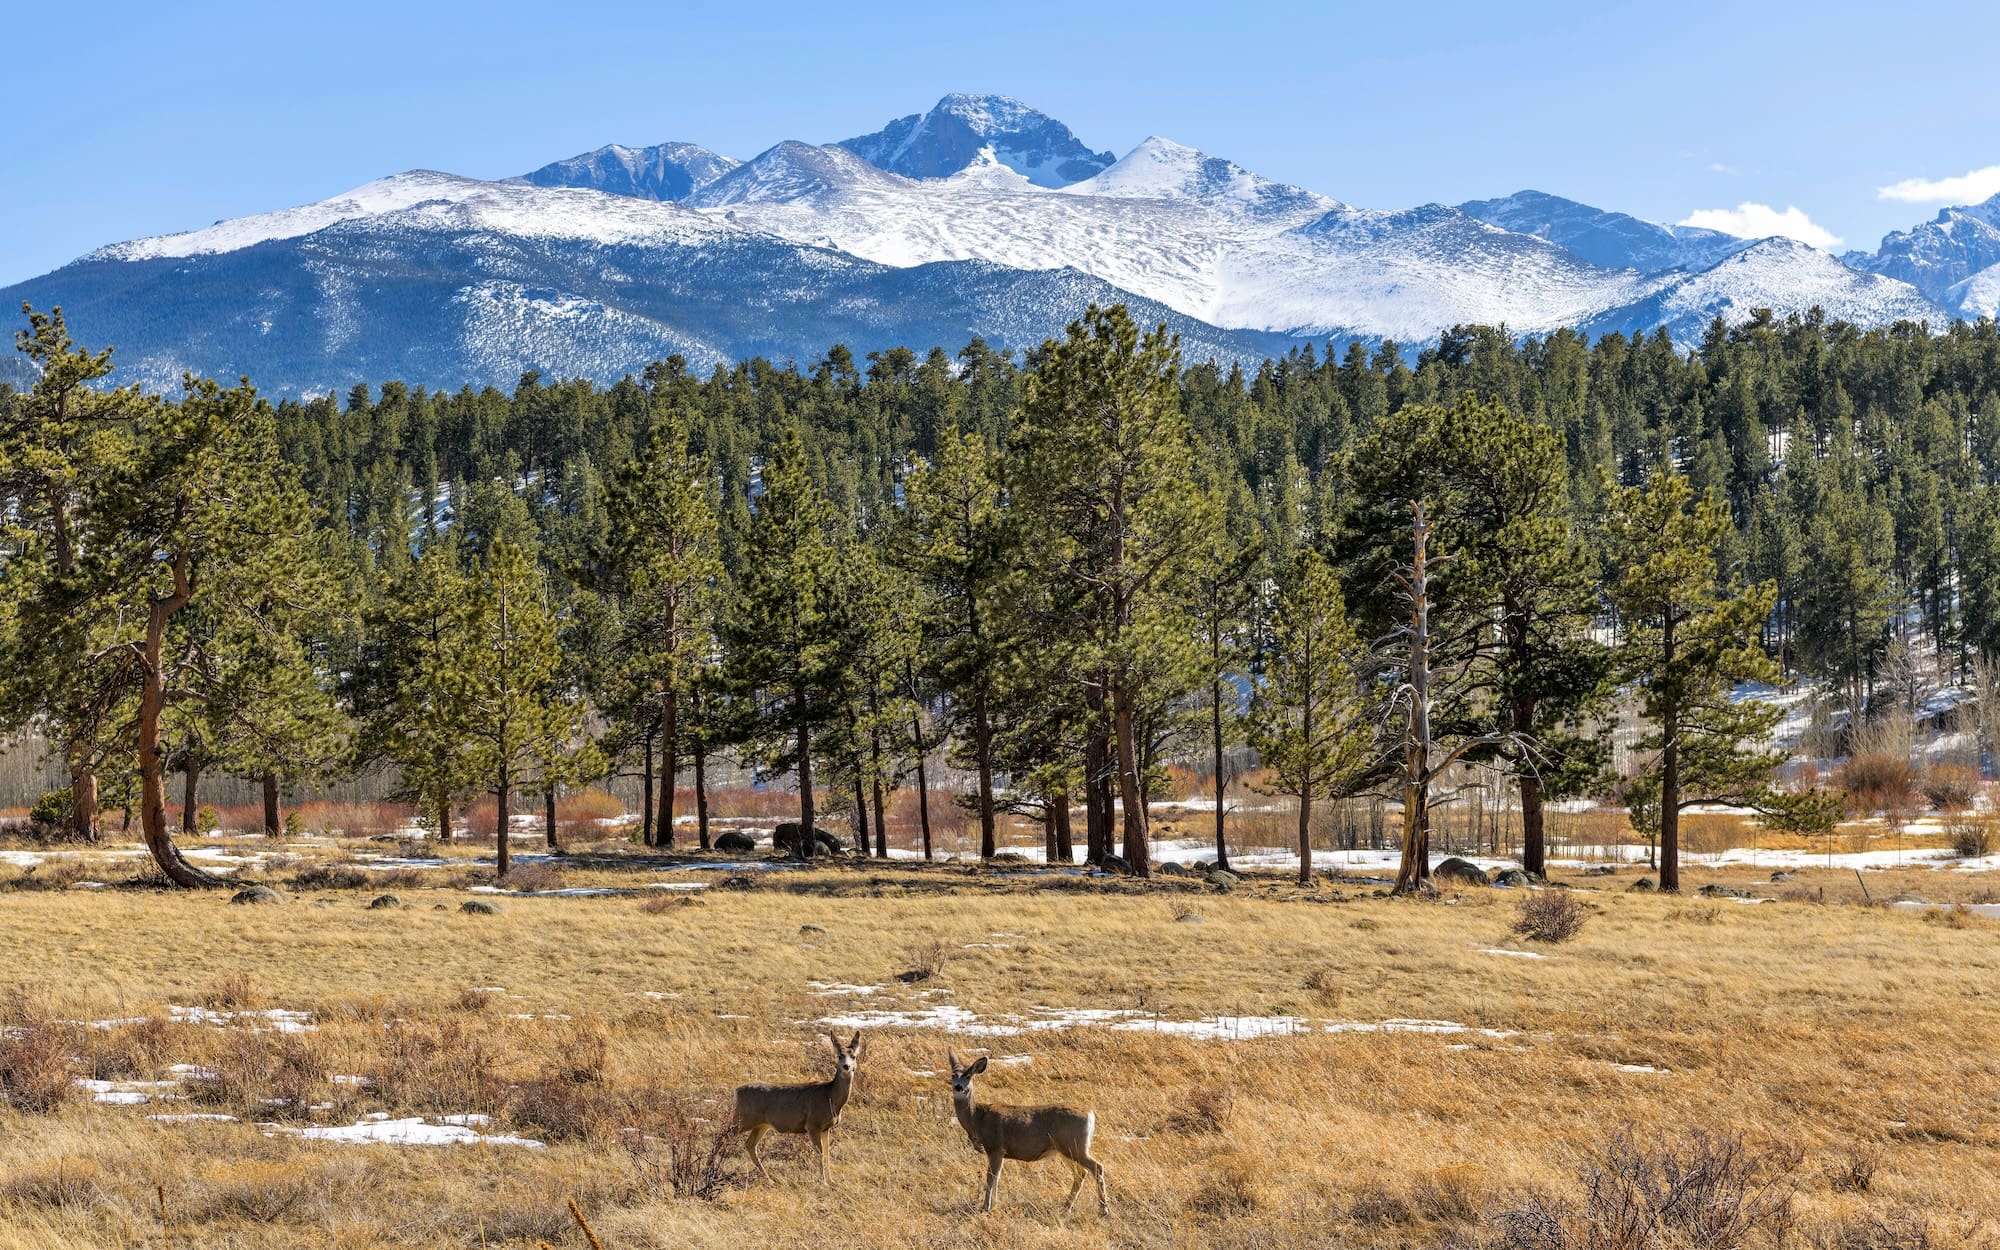 Longs Peak - Two young mule deers grazing at a mountain meadow at base of majestic Longs Peak on a sunny Spring day. Rocky Mountain National Park, Colorado, USA. spring habitat management for deer hunting